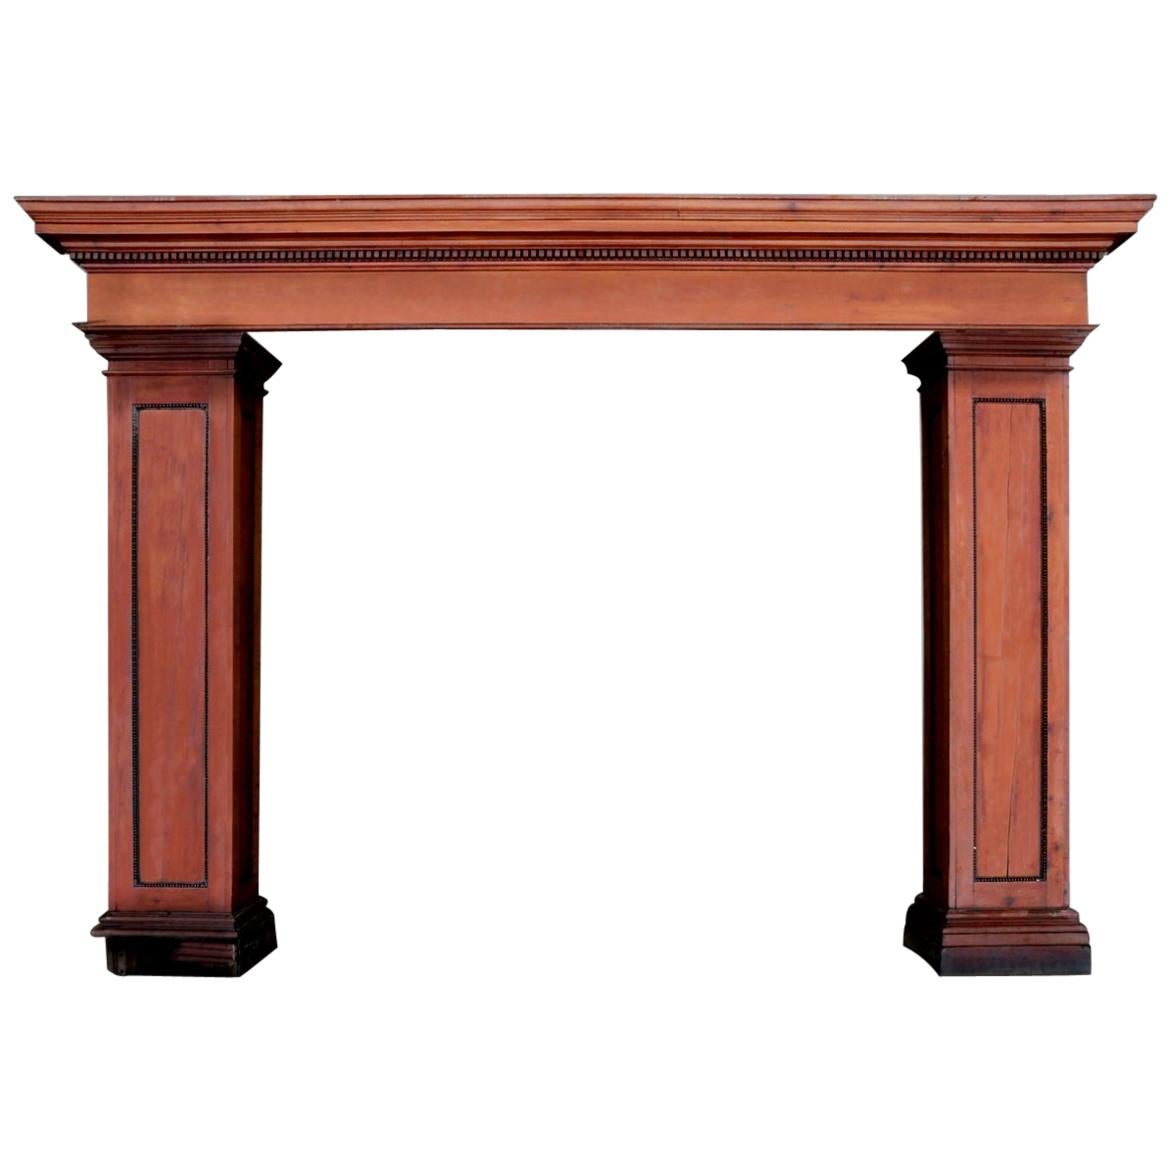 Monumental Wooden Entablature and Columns, 20th Century For Sale